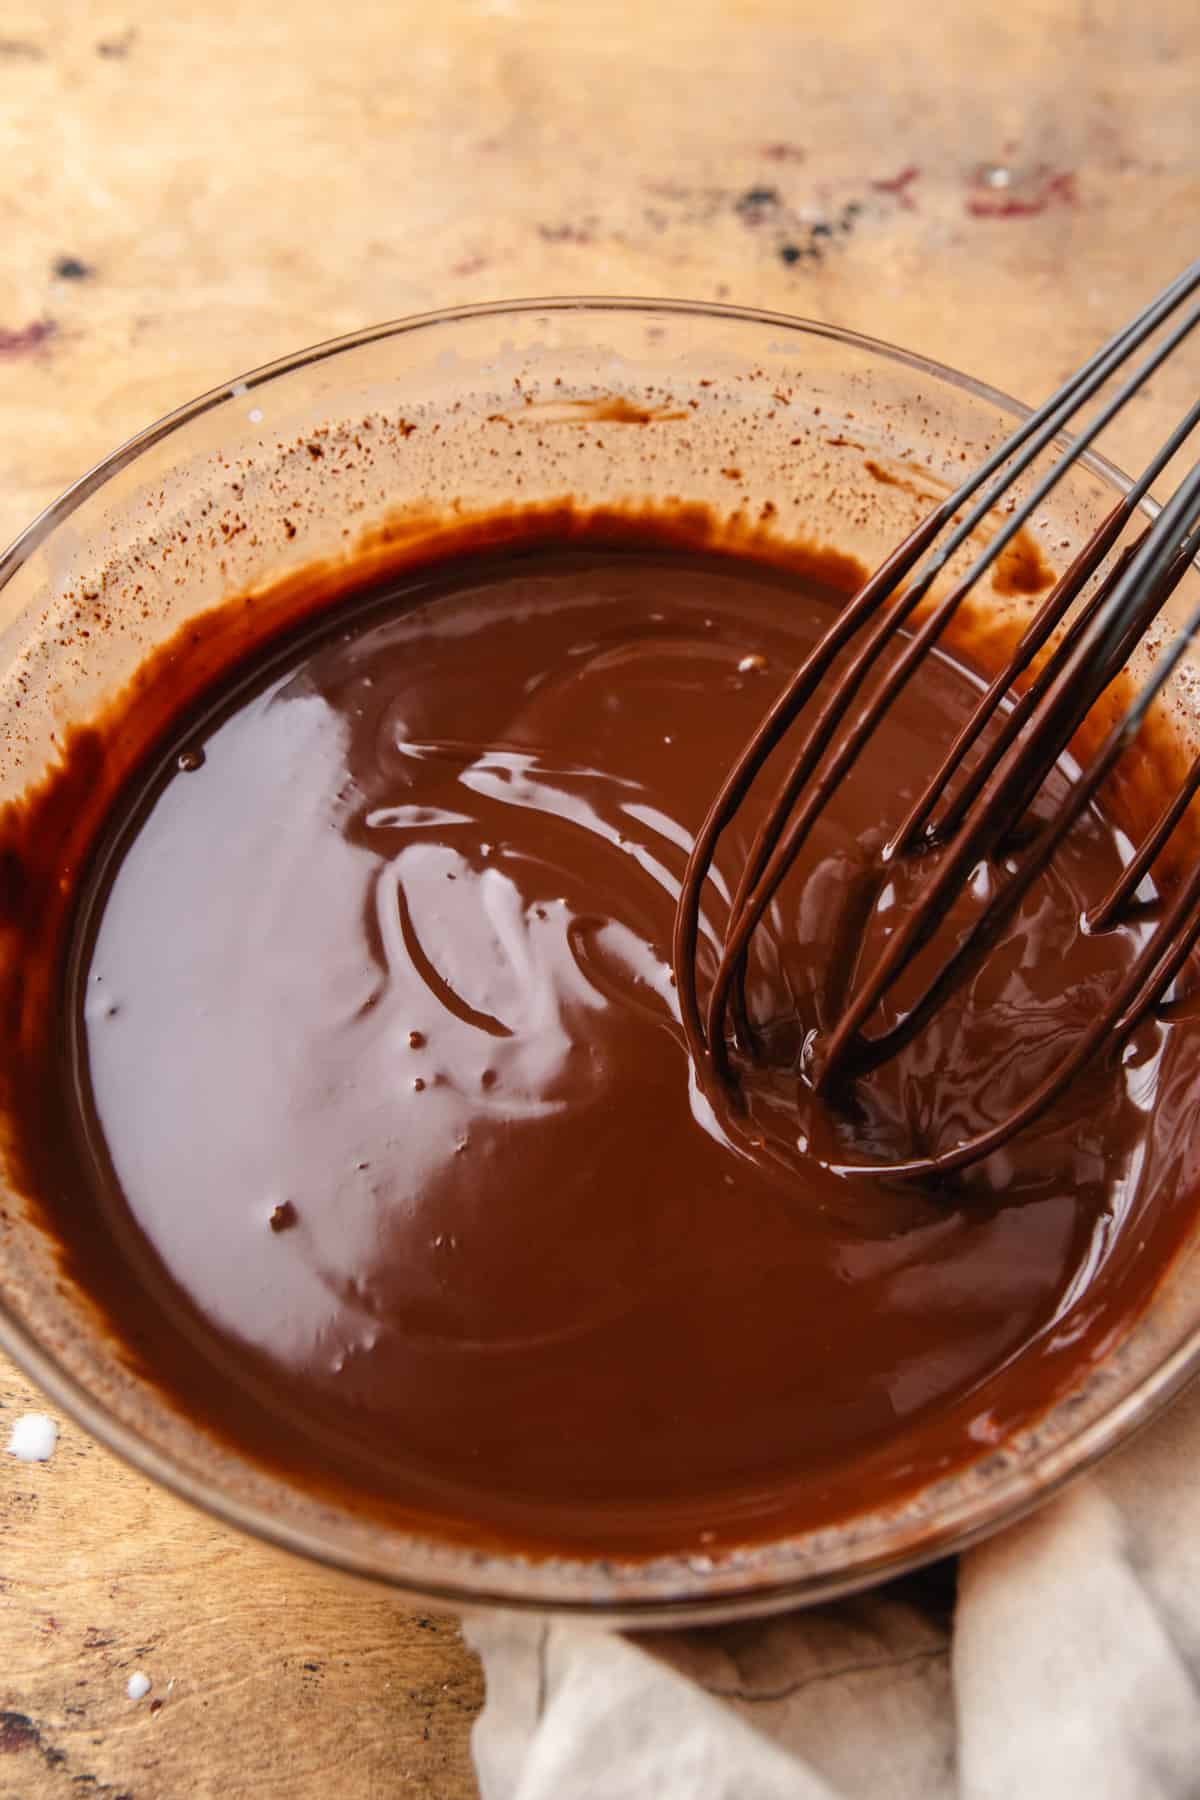 Melted chocolate in a bowl with a whisk.